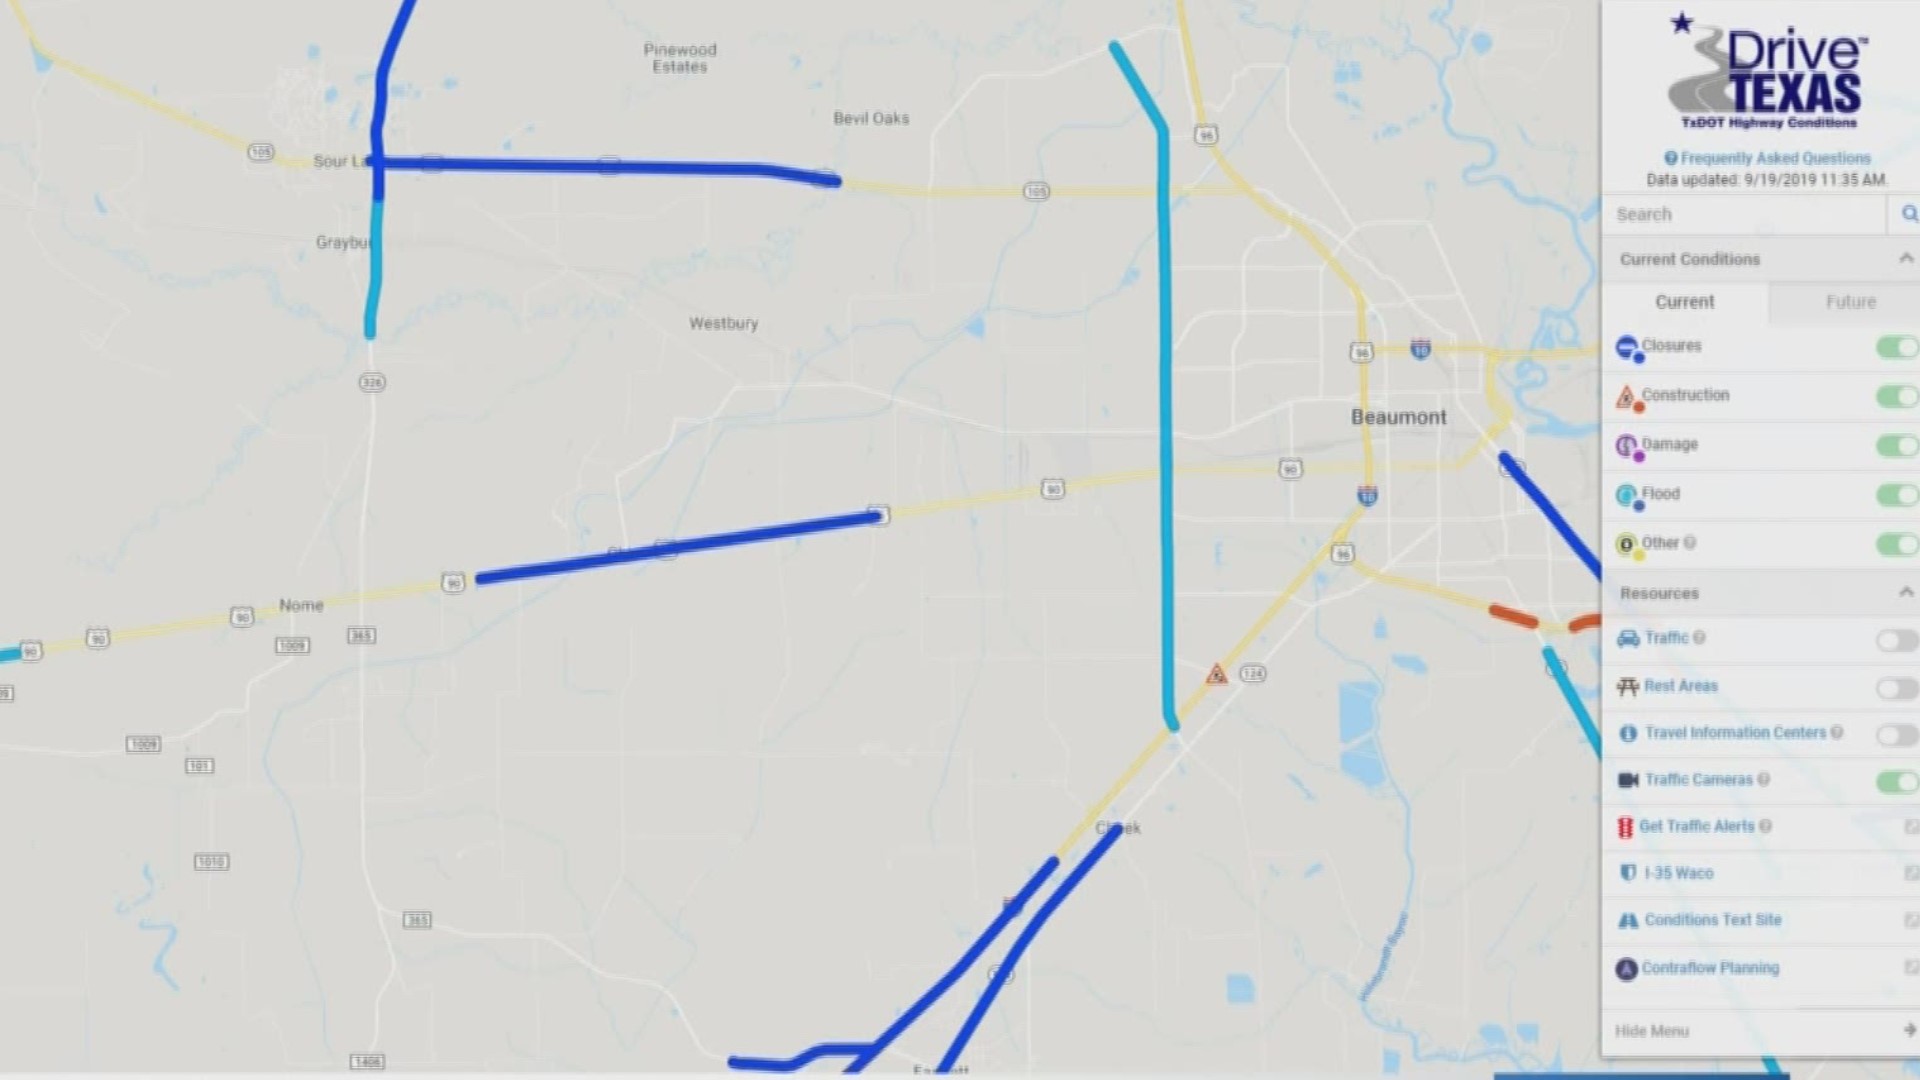 I-10 westbound traffic into Beaumont is being detoured north on US 69. I-10 eastbound from Houston is detoured north on state highway 146.